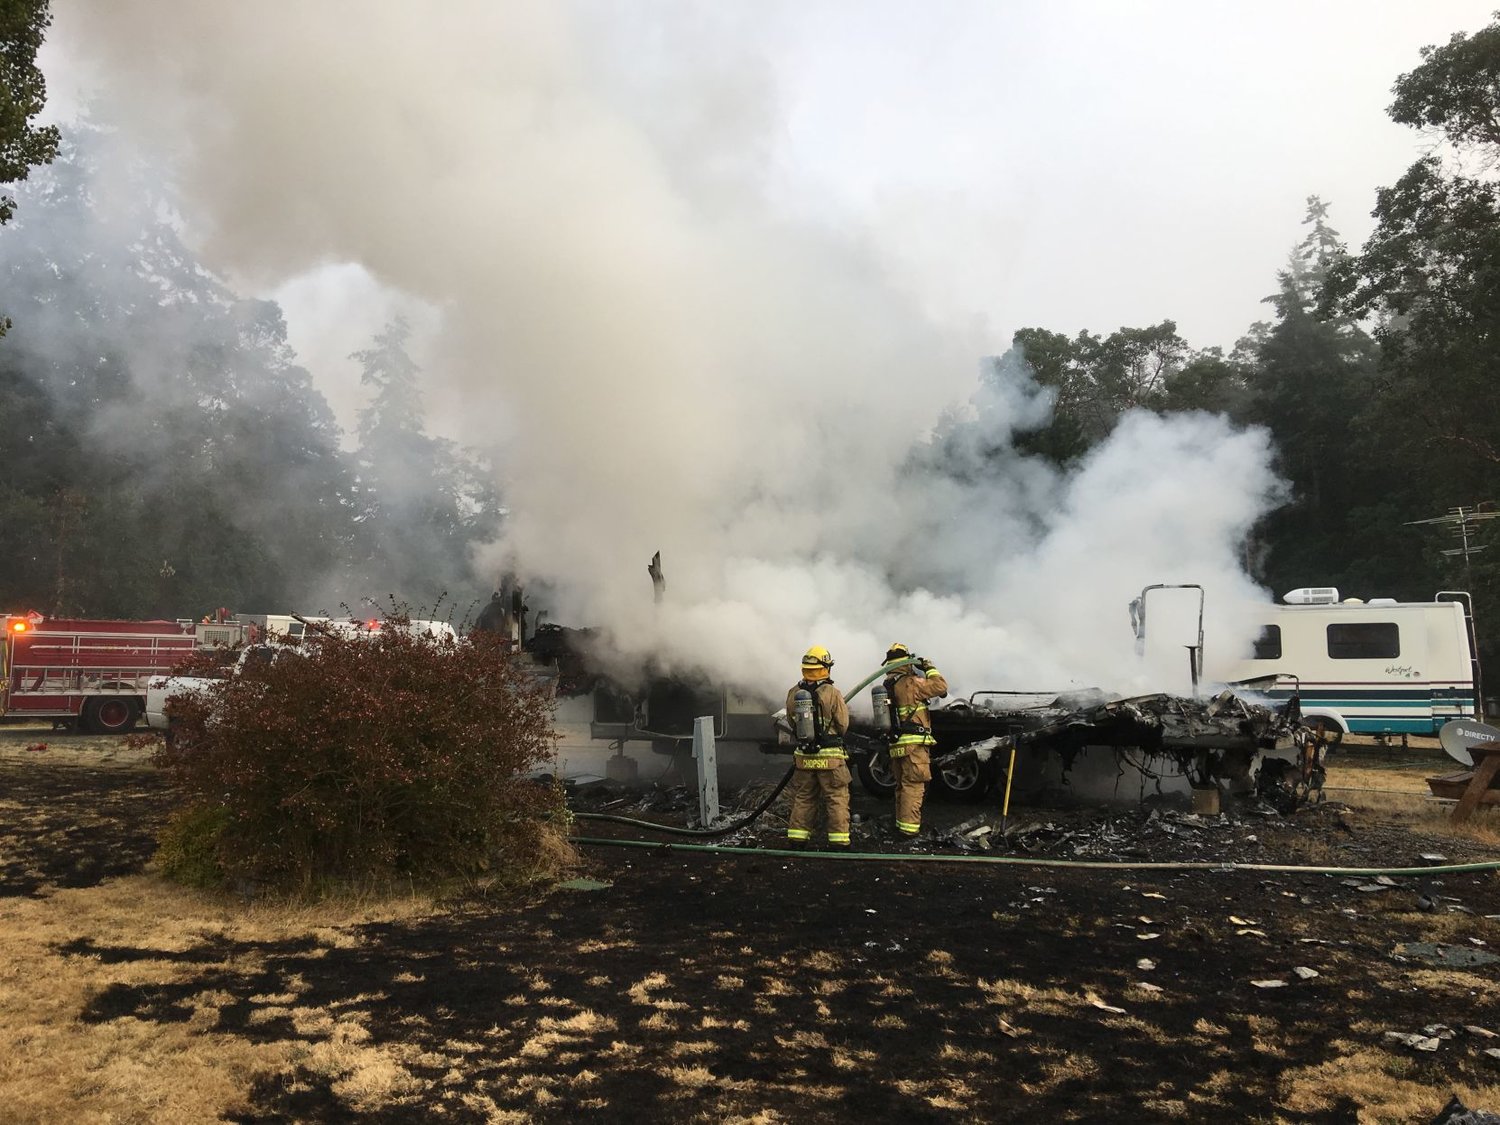 Firefighters survey the aftermath of a fire in the 9000 block of Flagler Road July 28, which claimed at least one life. Photo courtesy of Bill Beezley